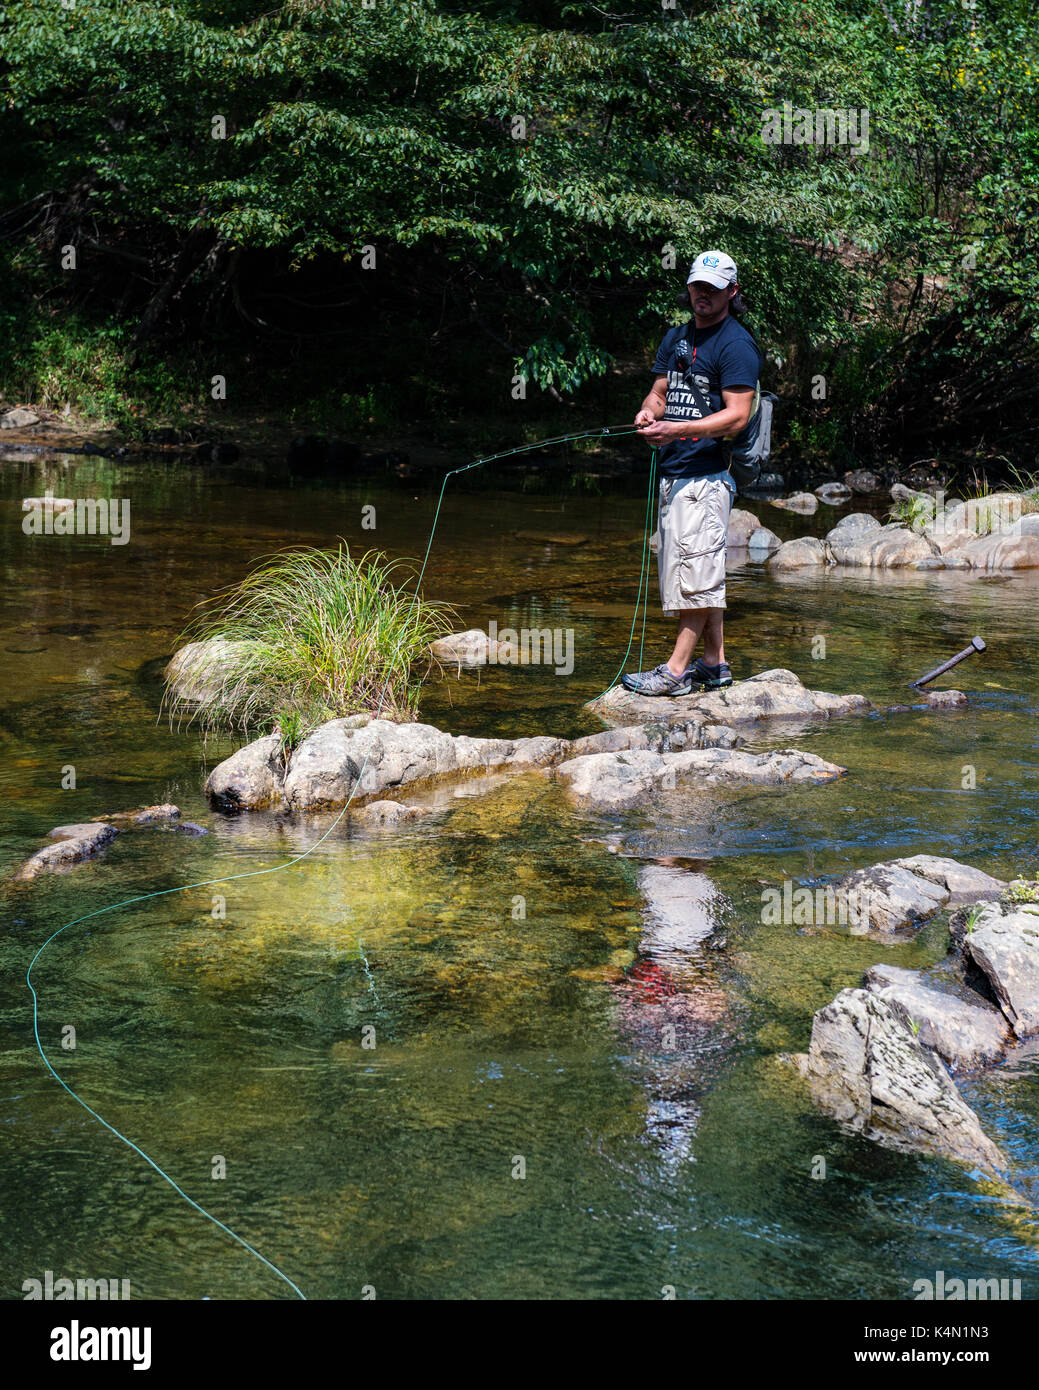 https://c8.alamy.com/comp/K4N1N3/trout-fishing-guide-man-uses-trout-rod-to-fish-for-troutbassbluegilland-K4N1N3.jpg